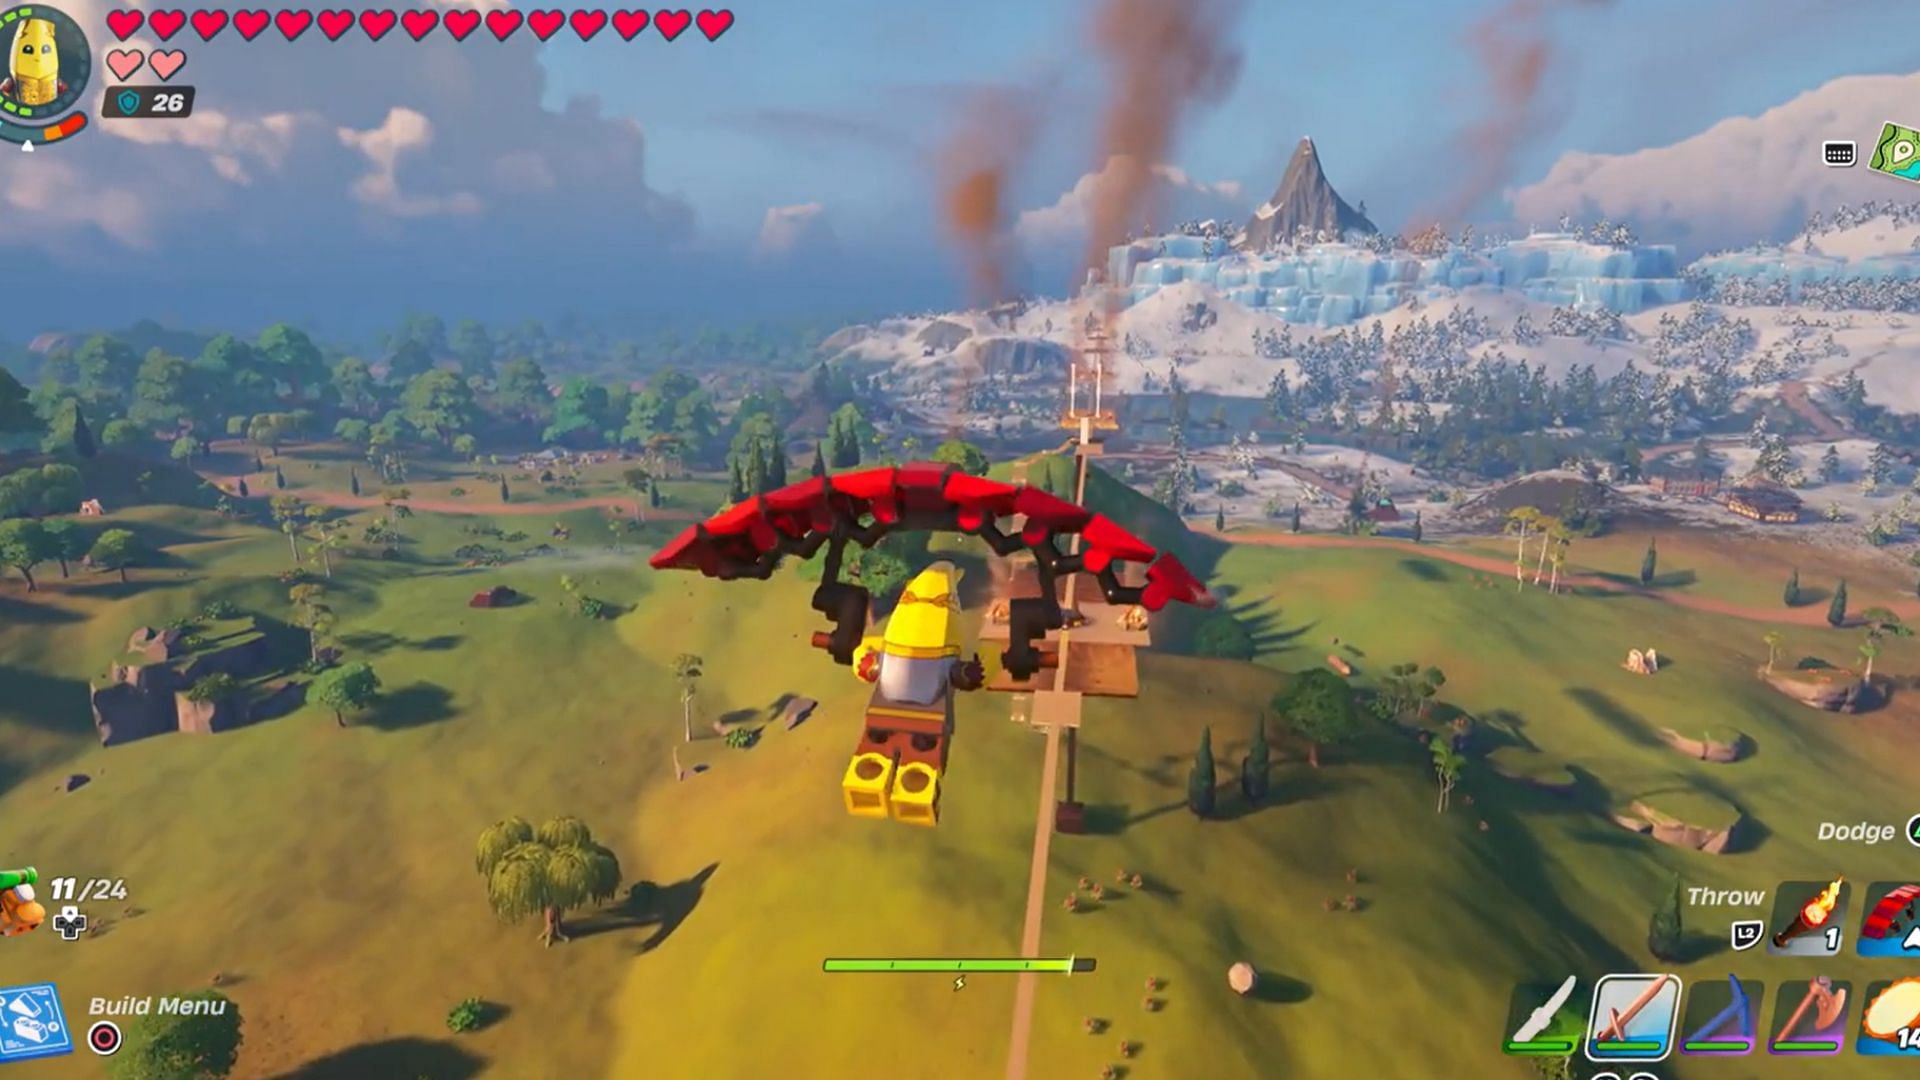 LEGO Fortnite player builds Launch Pad monorail system to travel long distances, community lauds their handiwork